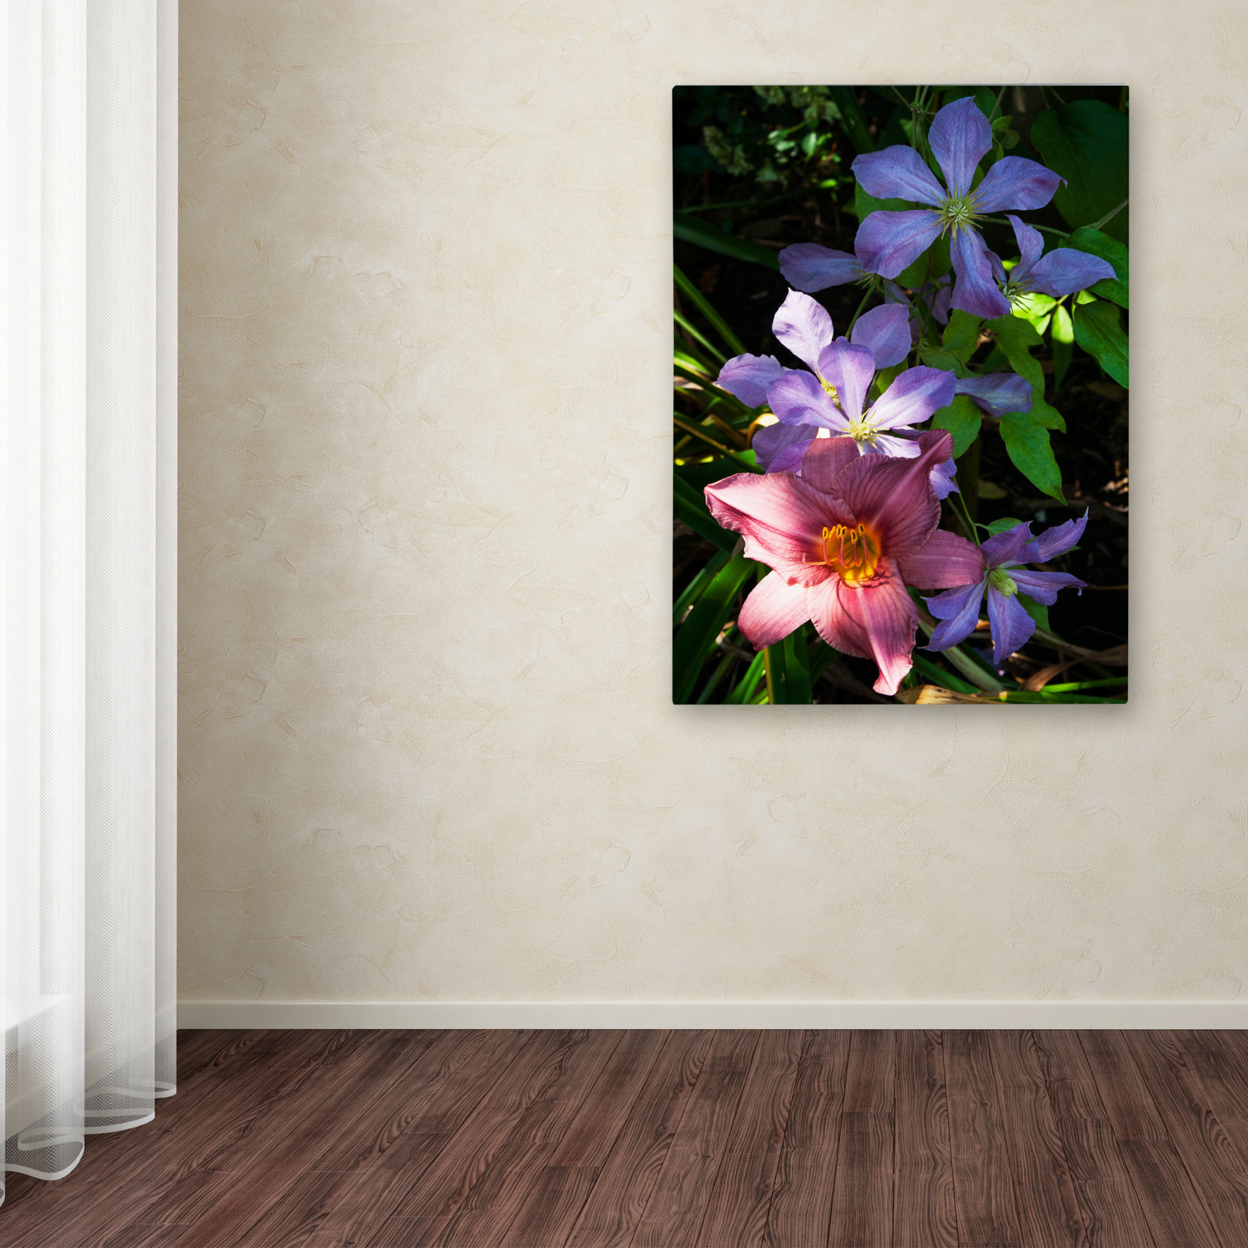 Kurt Shaffer 'Clematis And Lily' Canvas Wall Art 35 X 47 Inches